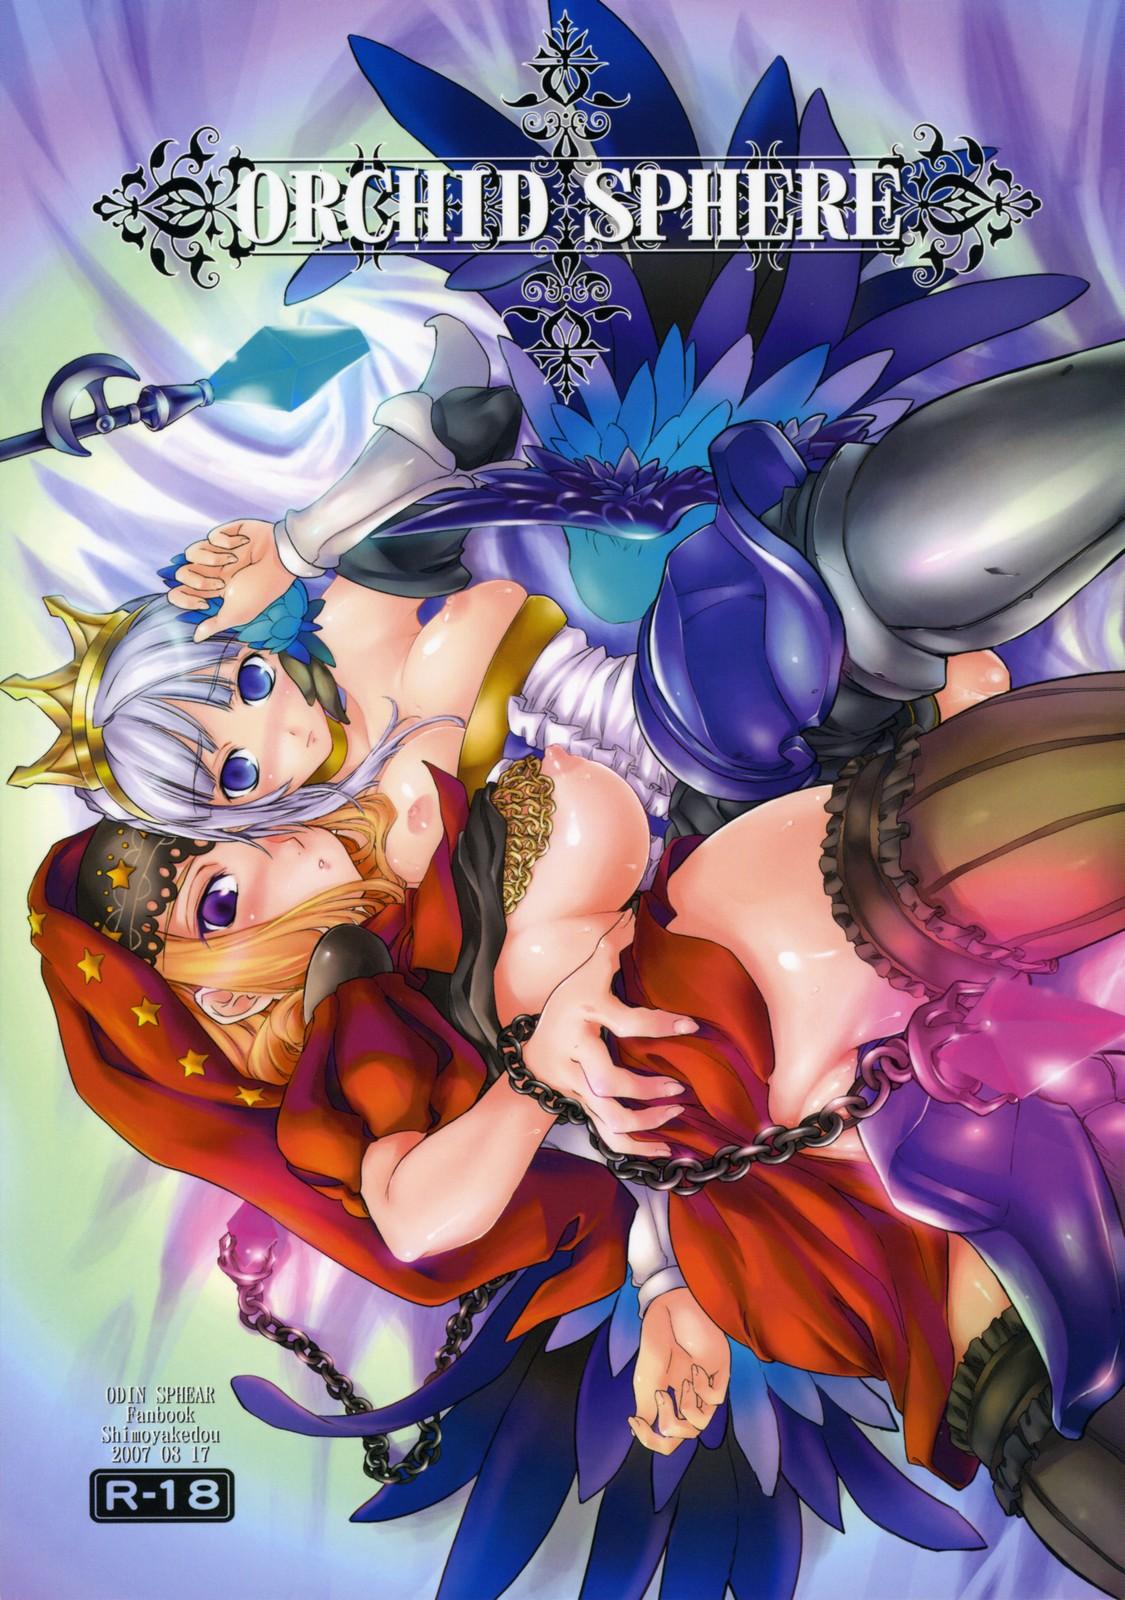 Khmer Orchid Sphere - Odin sphere Toy - Picture 1